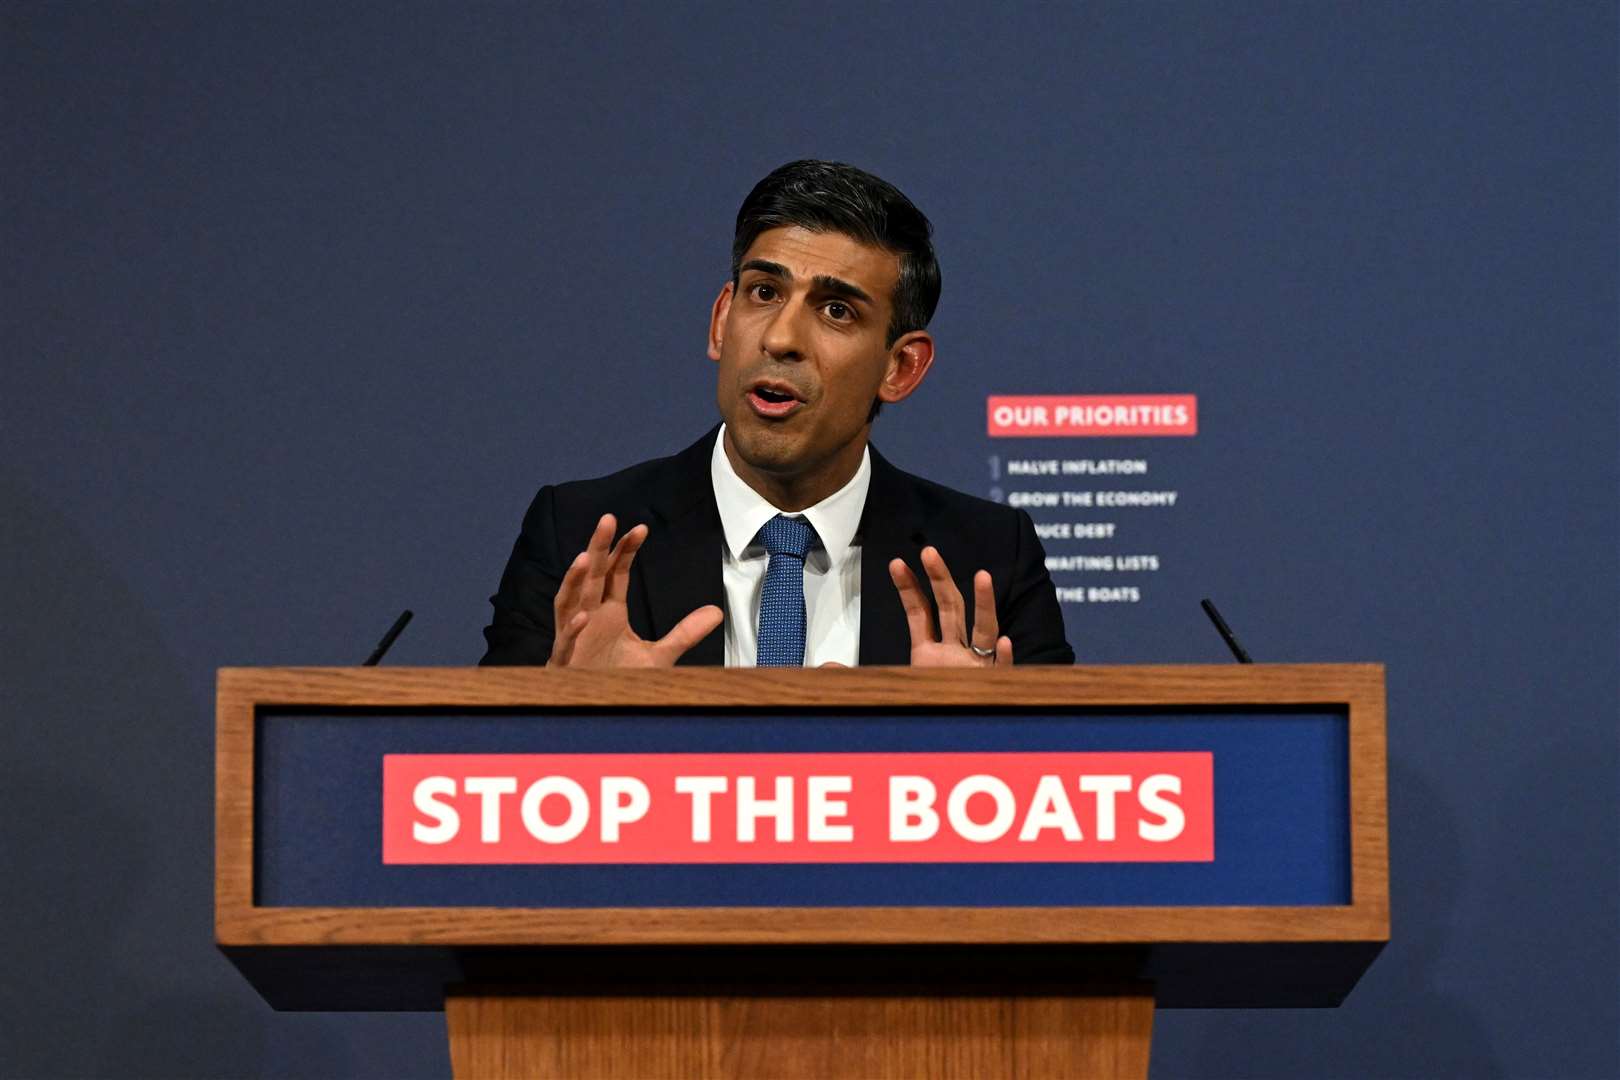 Prime Minister Rishi Sunak said tackling Channel crossings is one of his priorities (PA)